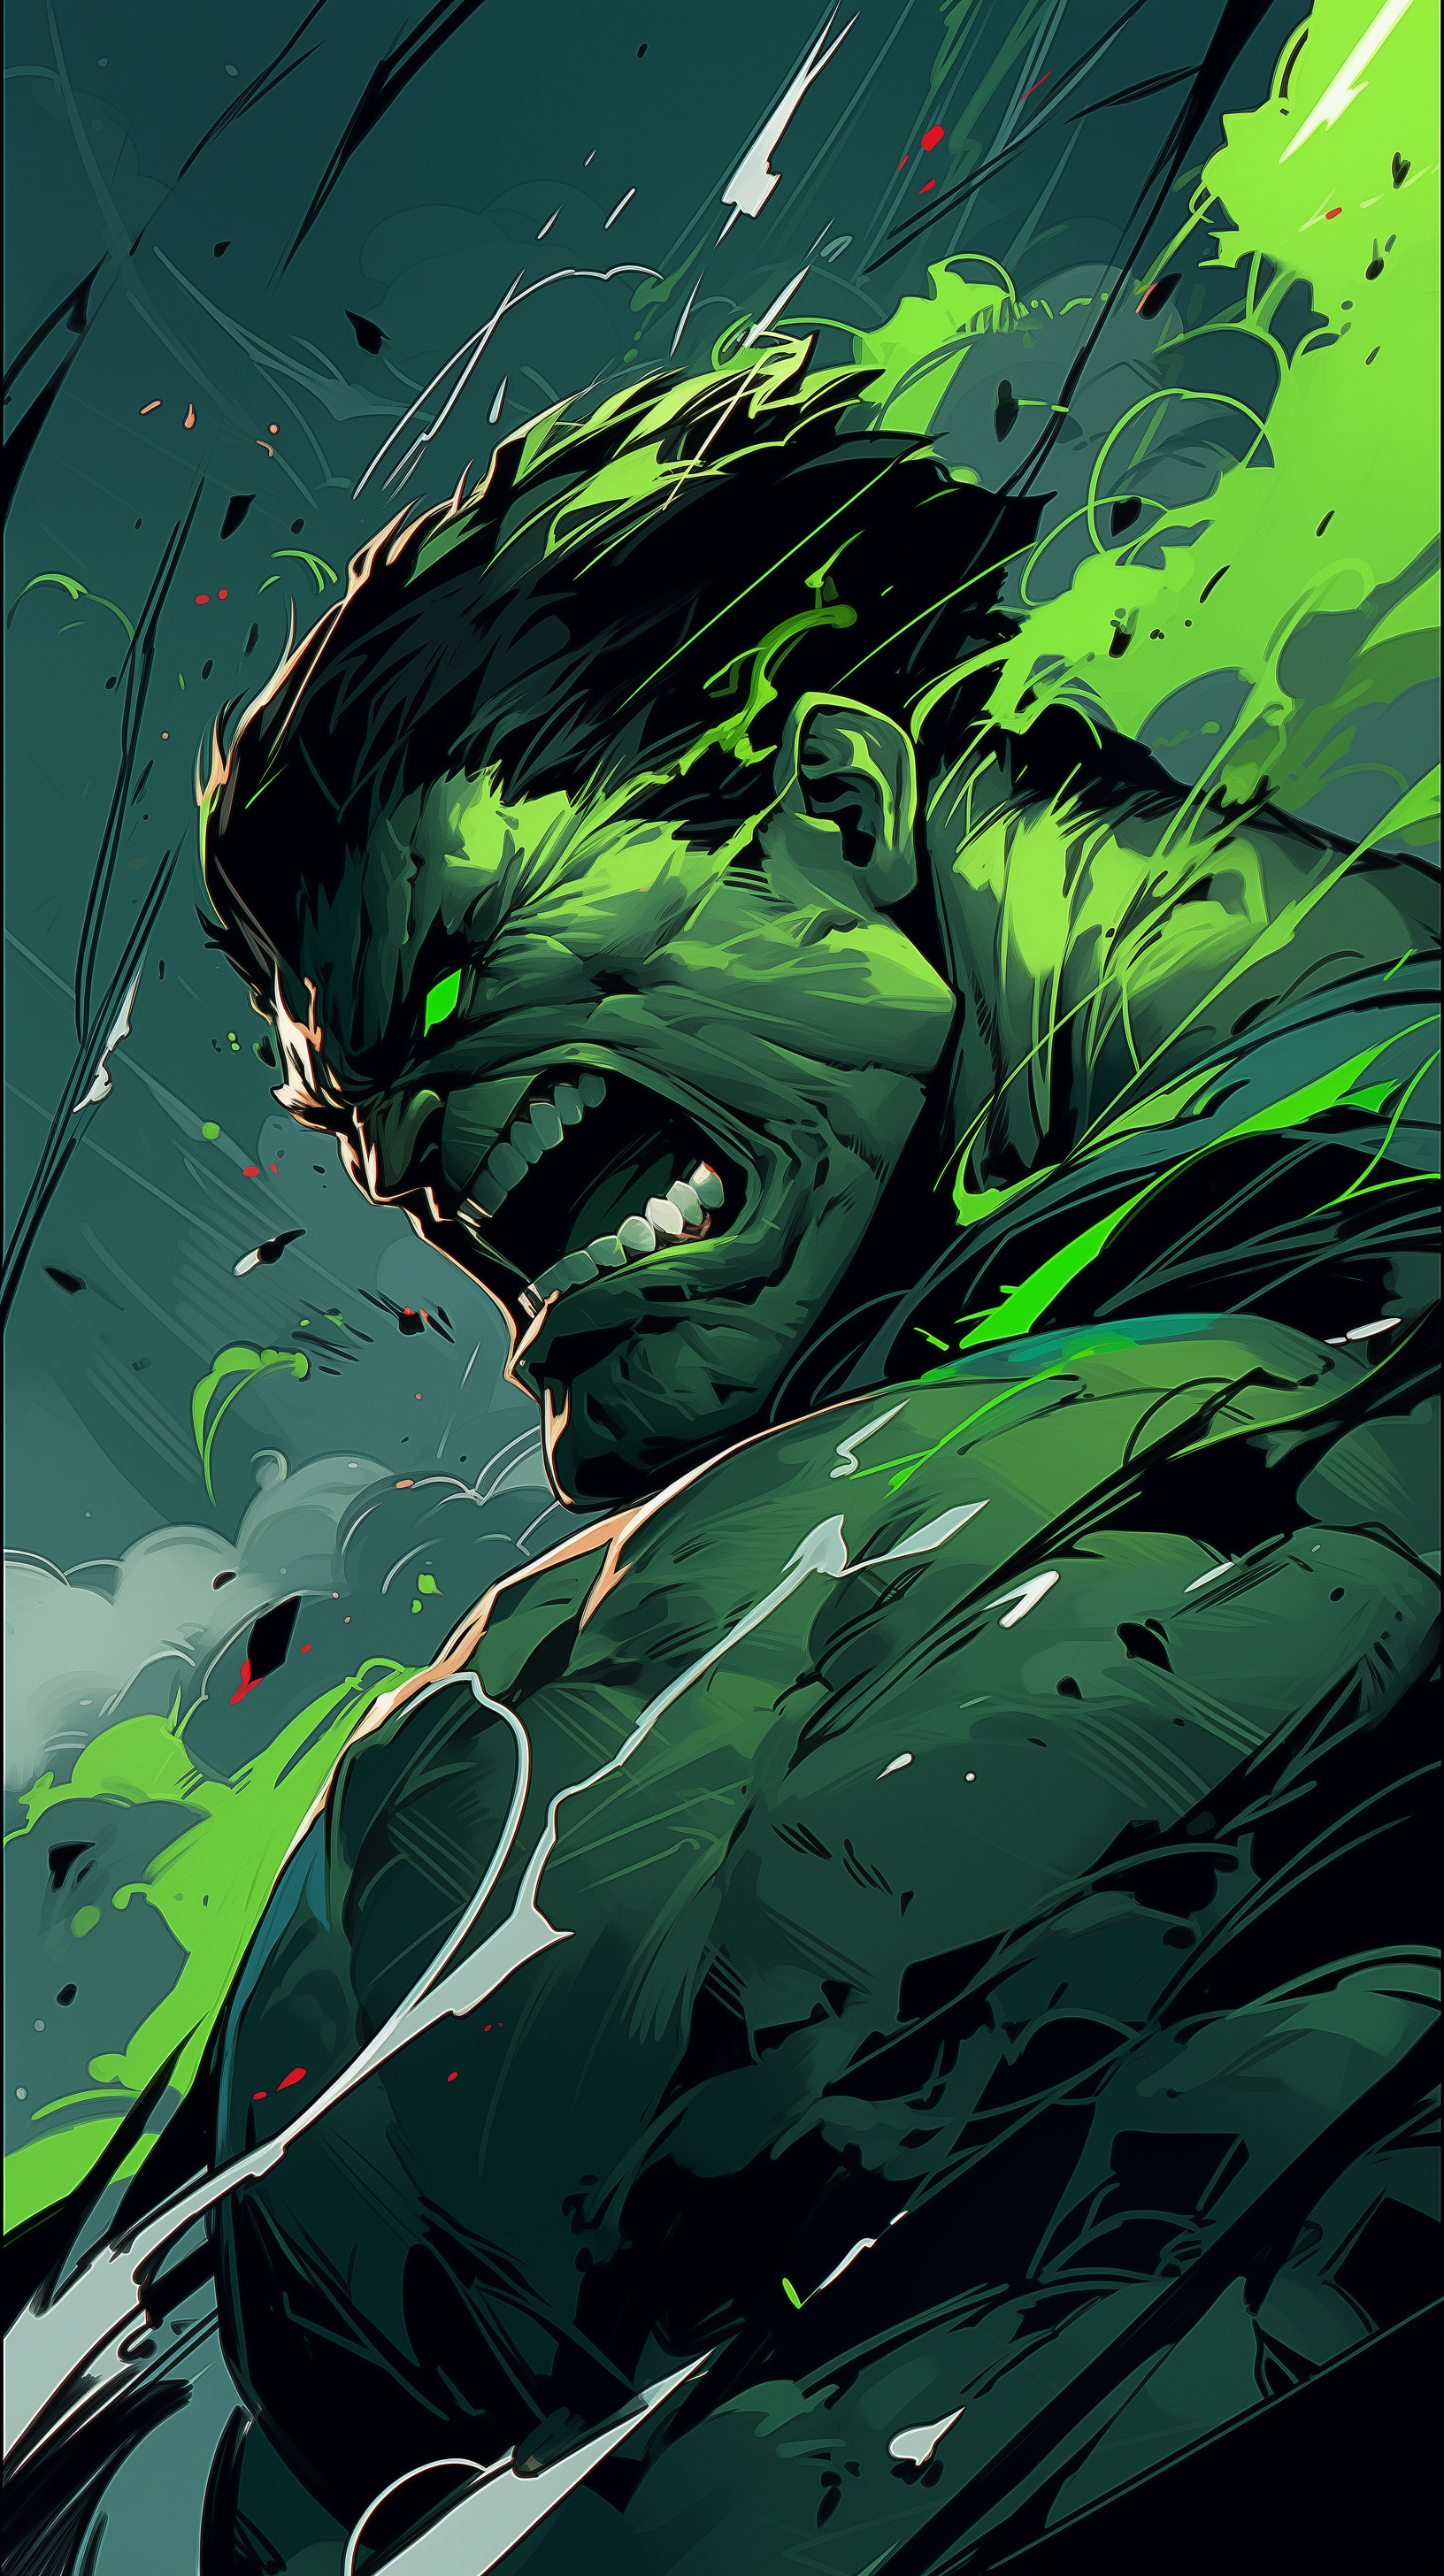 Dynamic Hulk phone wallpaper with vivid green and black tones, showcasing the iconic superhero in an intense pose, perfect for comic book fans.